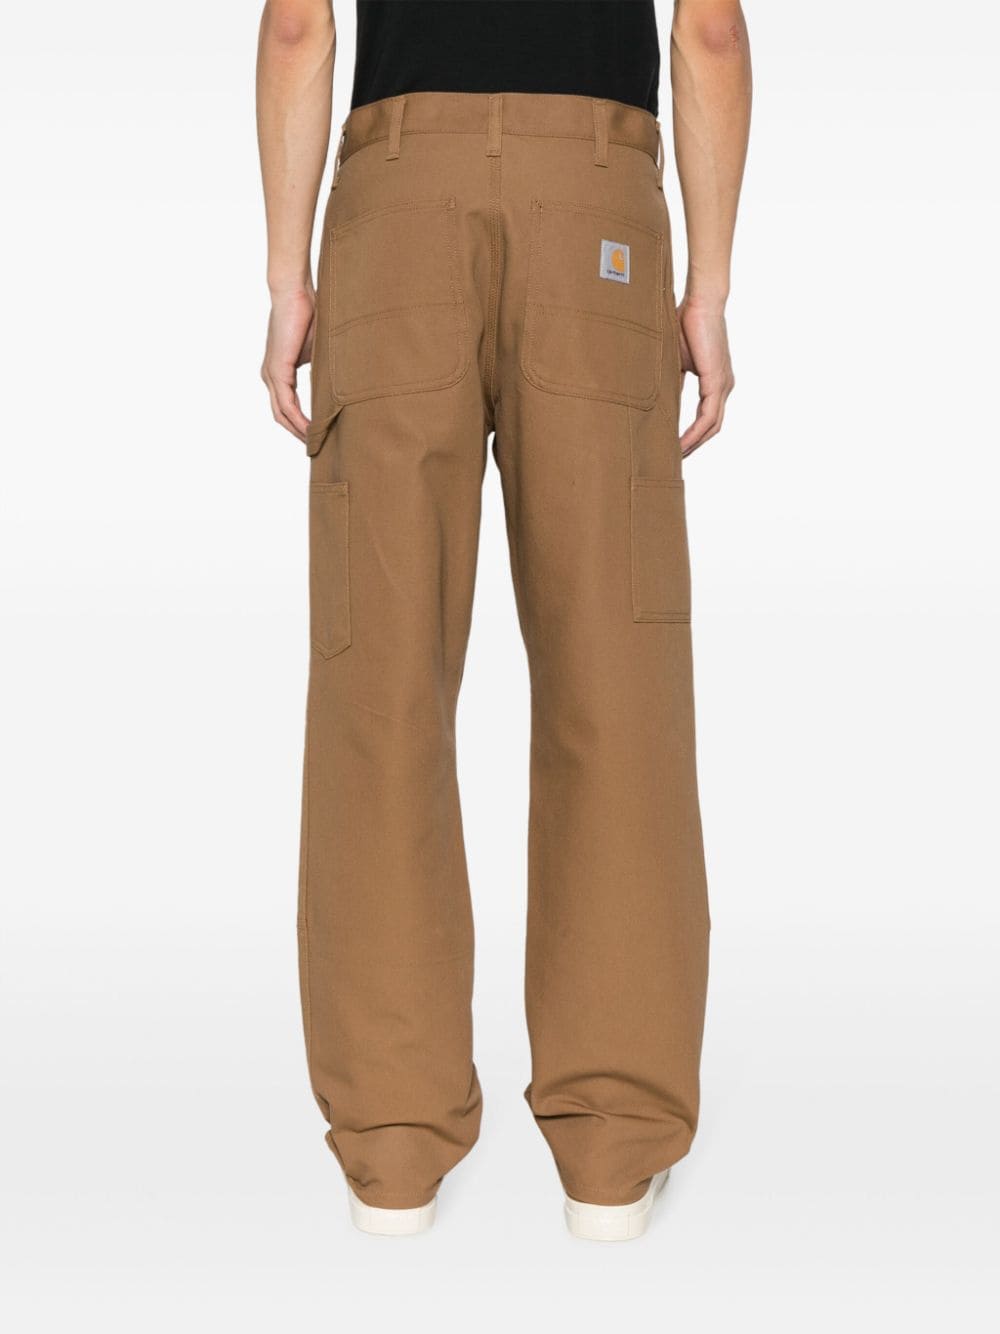 Double Knee Pant | Hamilton Brown (rinsed)